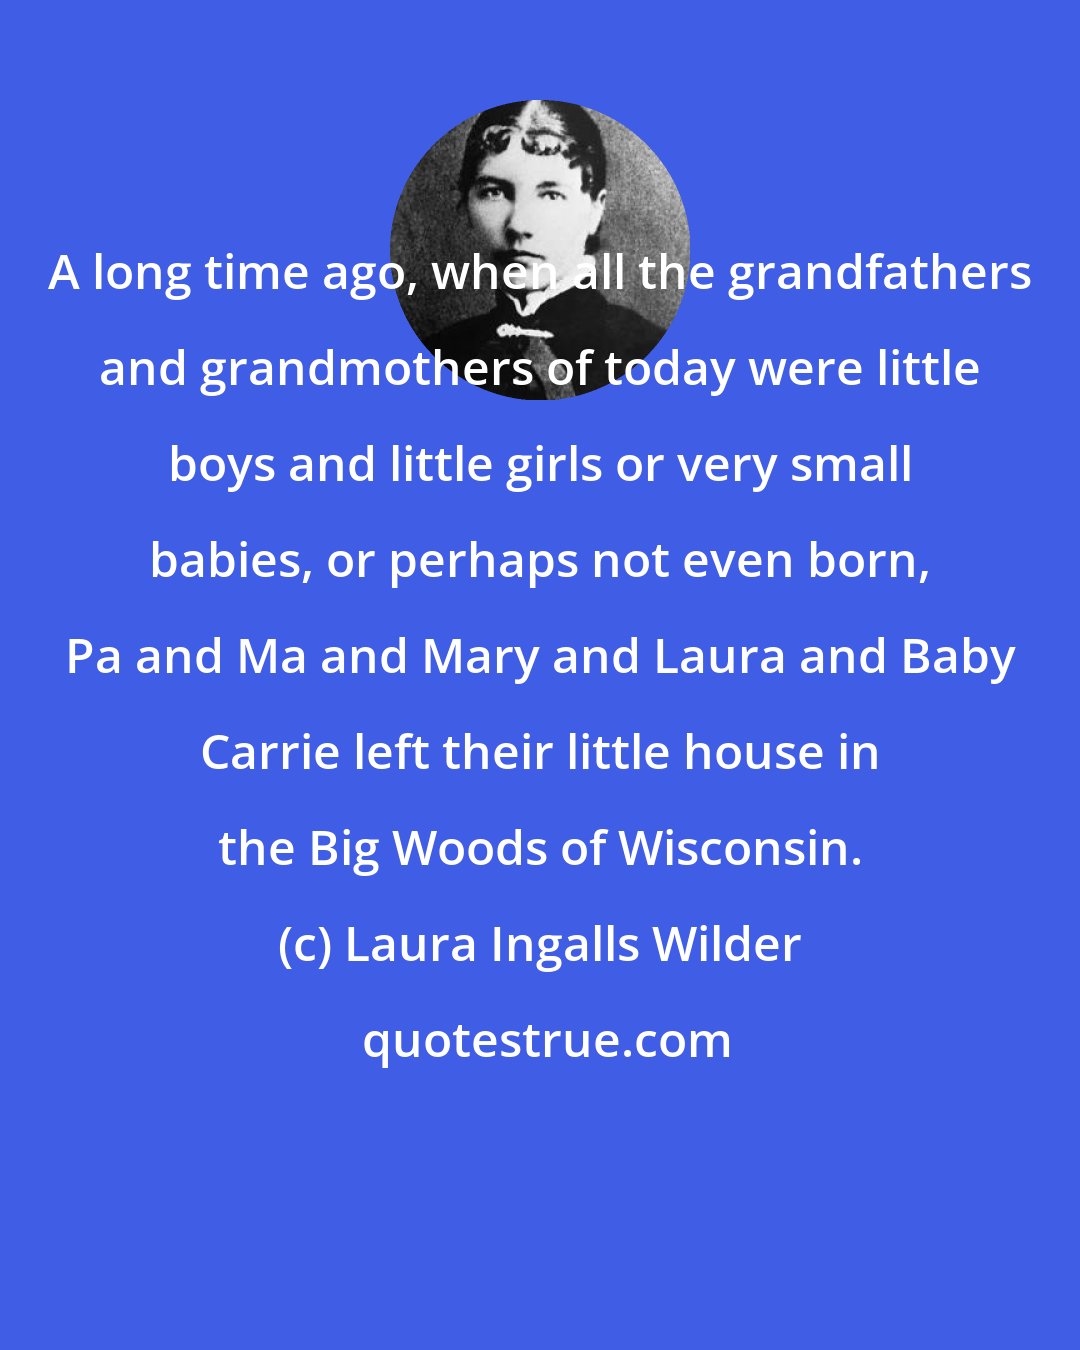 Laura Ingalls Wilder: A long time ago, when all the grandfathers and grandmothers of today were little boys and little girls or very small babies, or perhaps not even born, Pa and Ma and Mary and Laura and Baby Carrie left their little house in the Big Woods of Wisconsin.